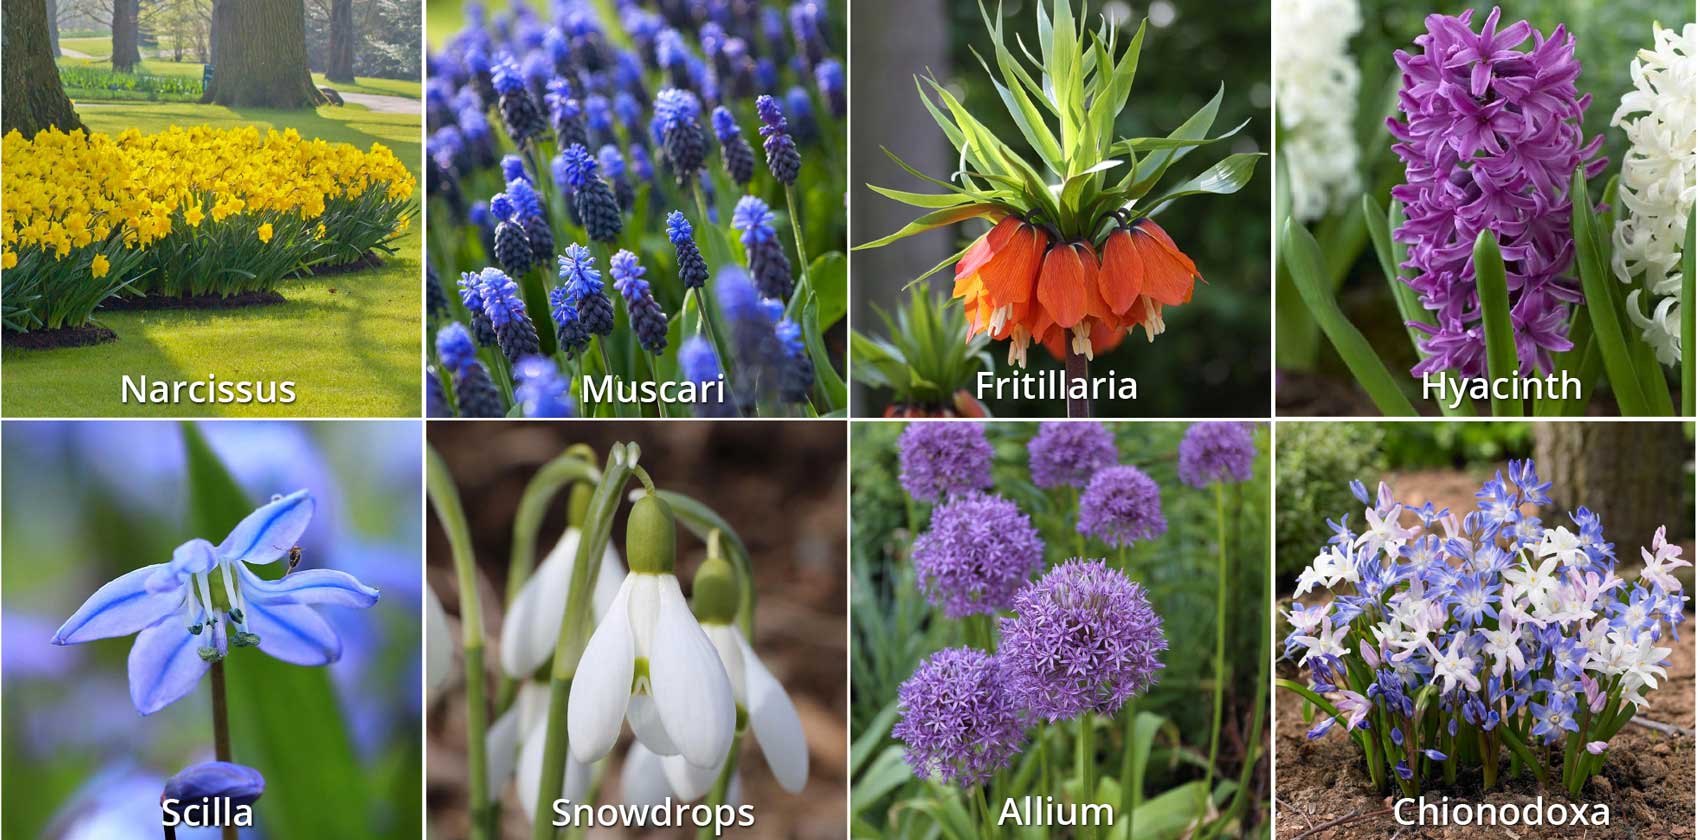 How to Protect Fall Bulbs from Chipmunks and Squirrels - Longfield-Gardens